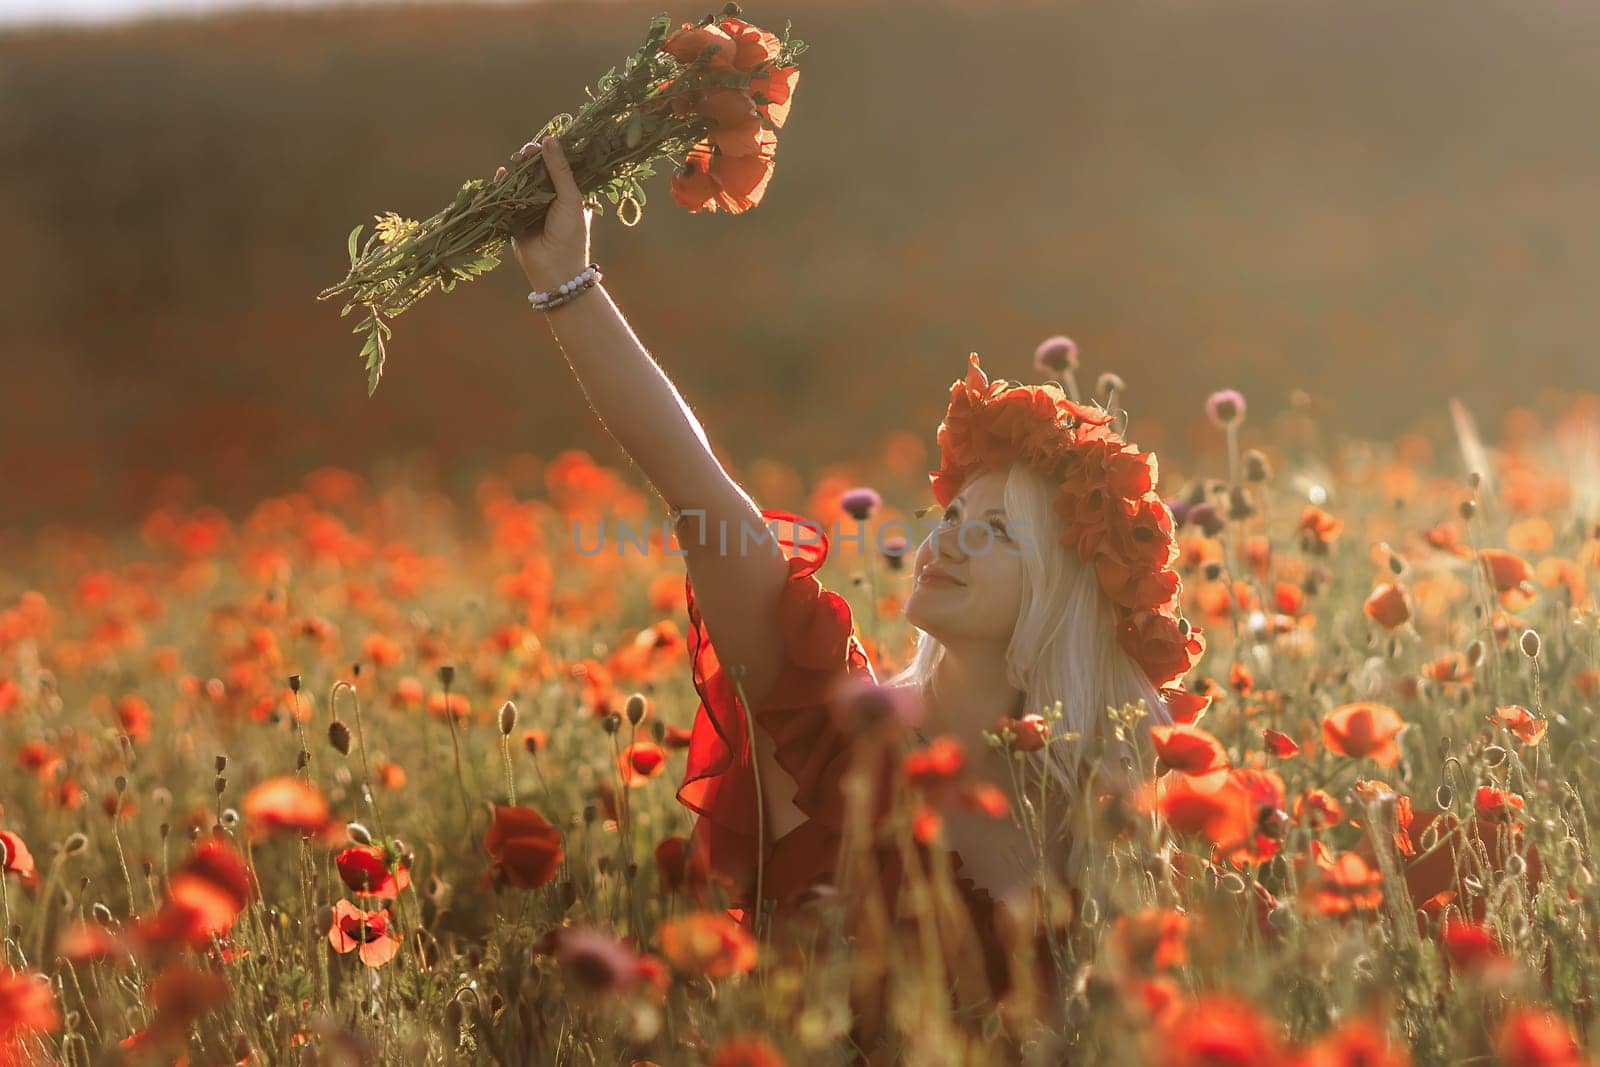 A woman is standing in a field of red flowers, holding a bouquet of flowers in her hand. The scene is serene and peaceful, with the woman surrounded by the beauty of nature